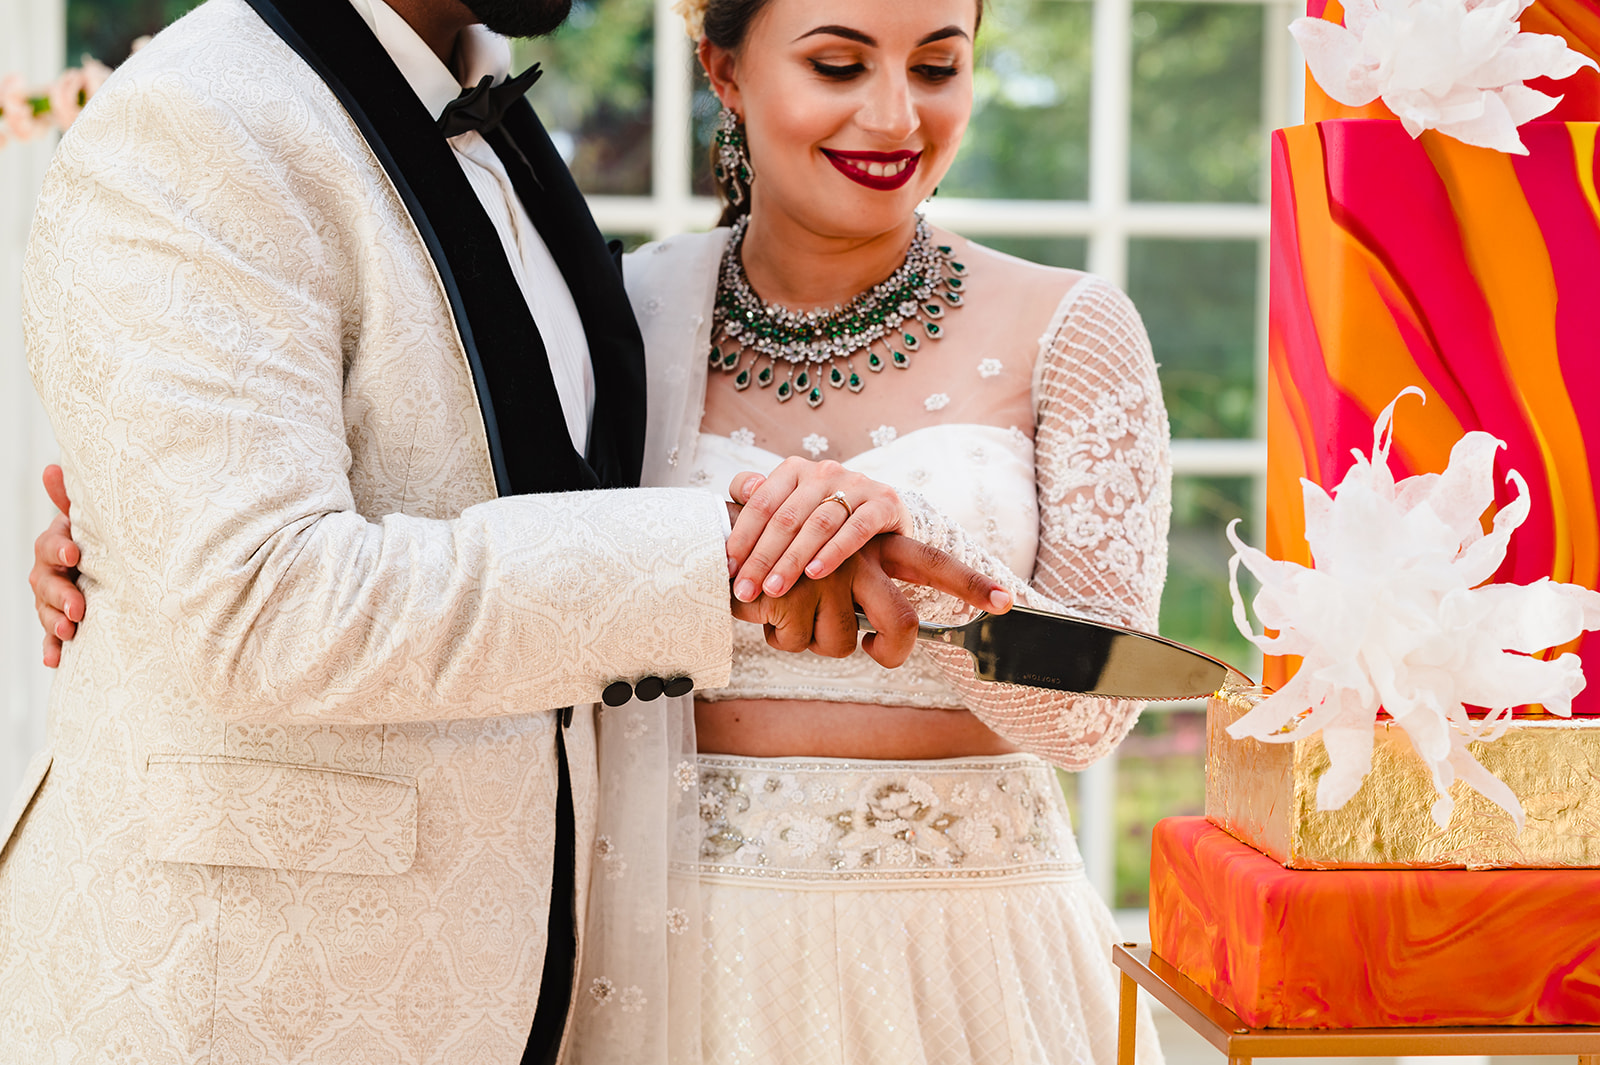 Bride and groom cutting their cake indian wedding photoshoot at stapleford park by Amanda Forman Photography